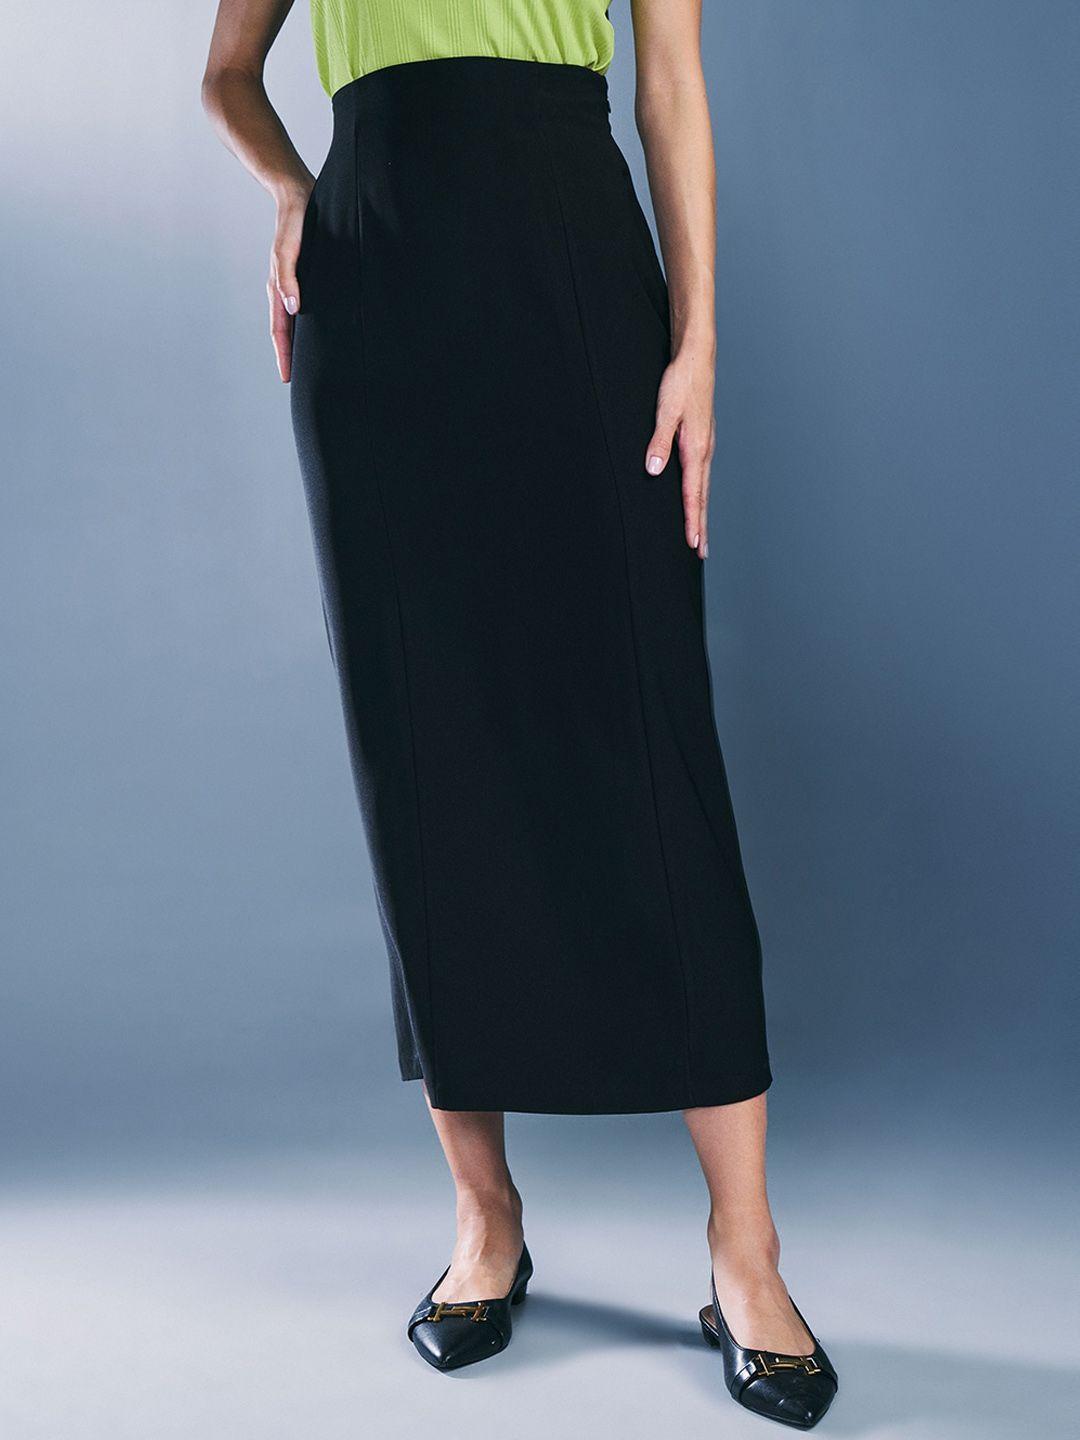 and-mid-rise-pencil-midi-skirt